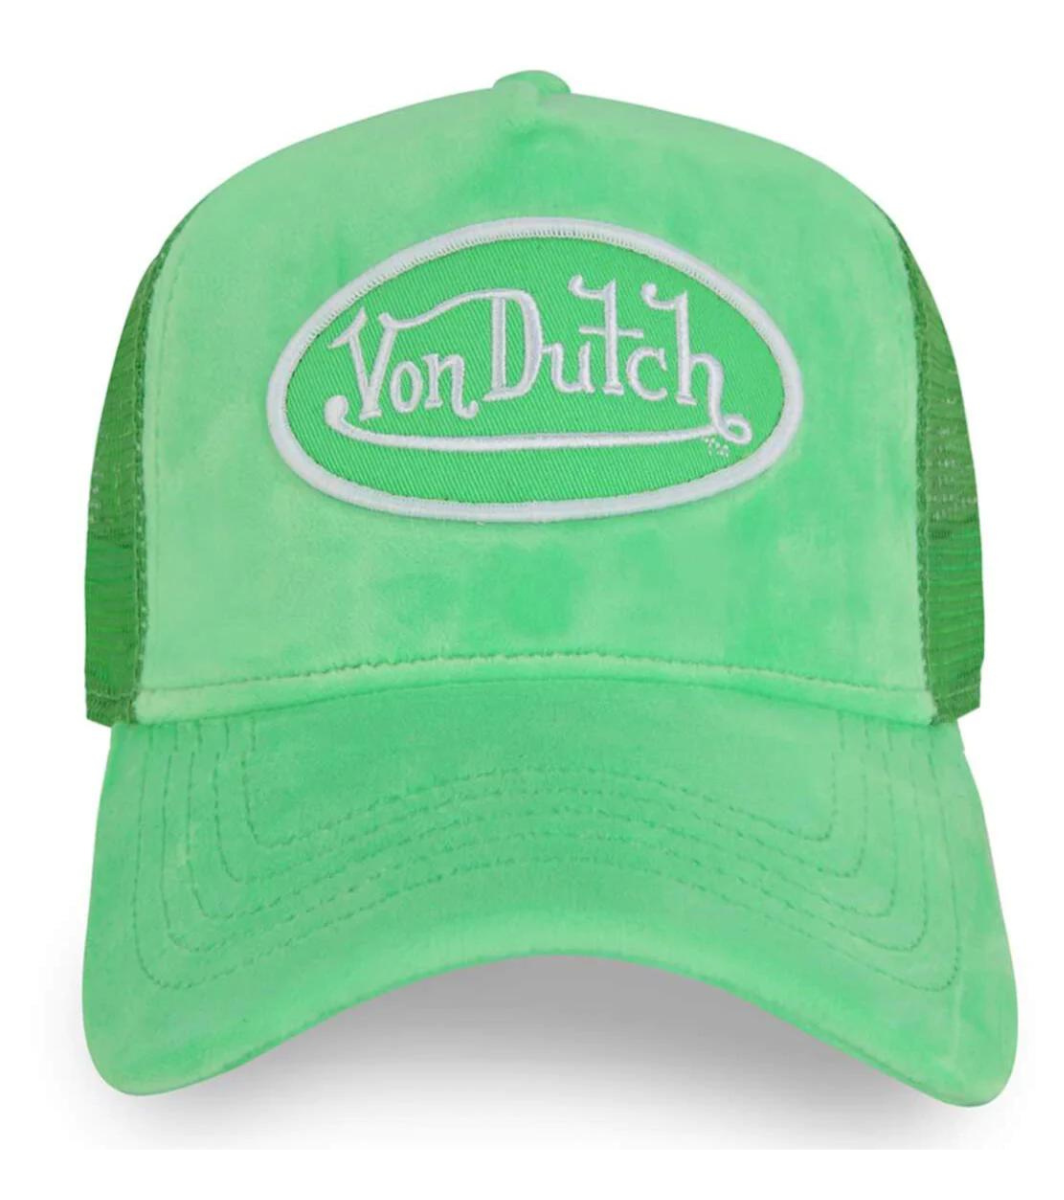 Classic Snapback Trucker Hat by Von Dutch features Lime Green Velvet cloth with iconic logo patch on front, white breathable mesh rear, and an adjustable snapback panel.